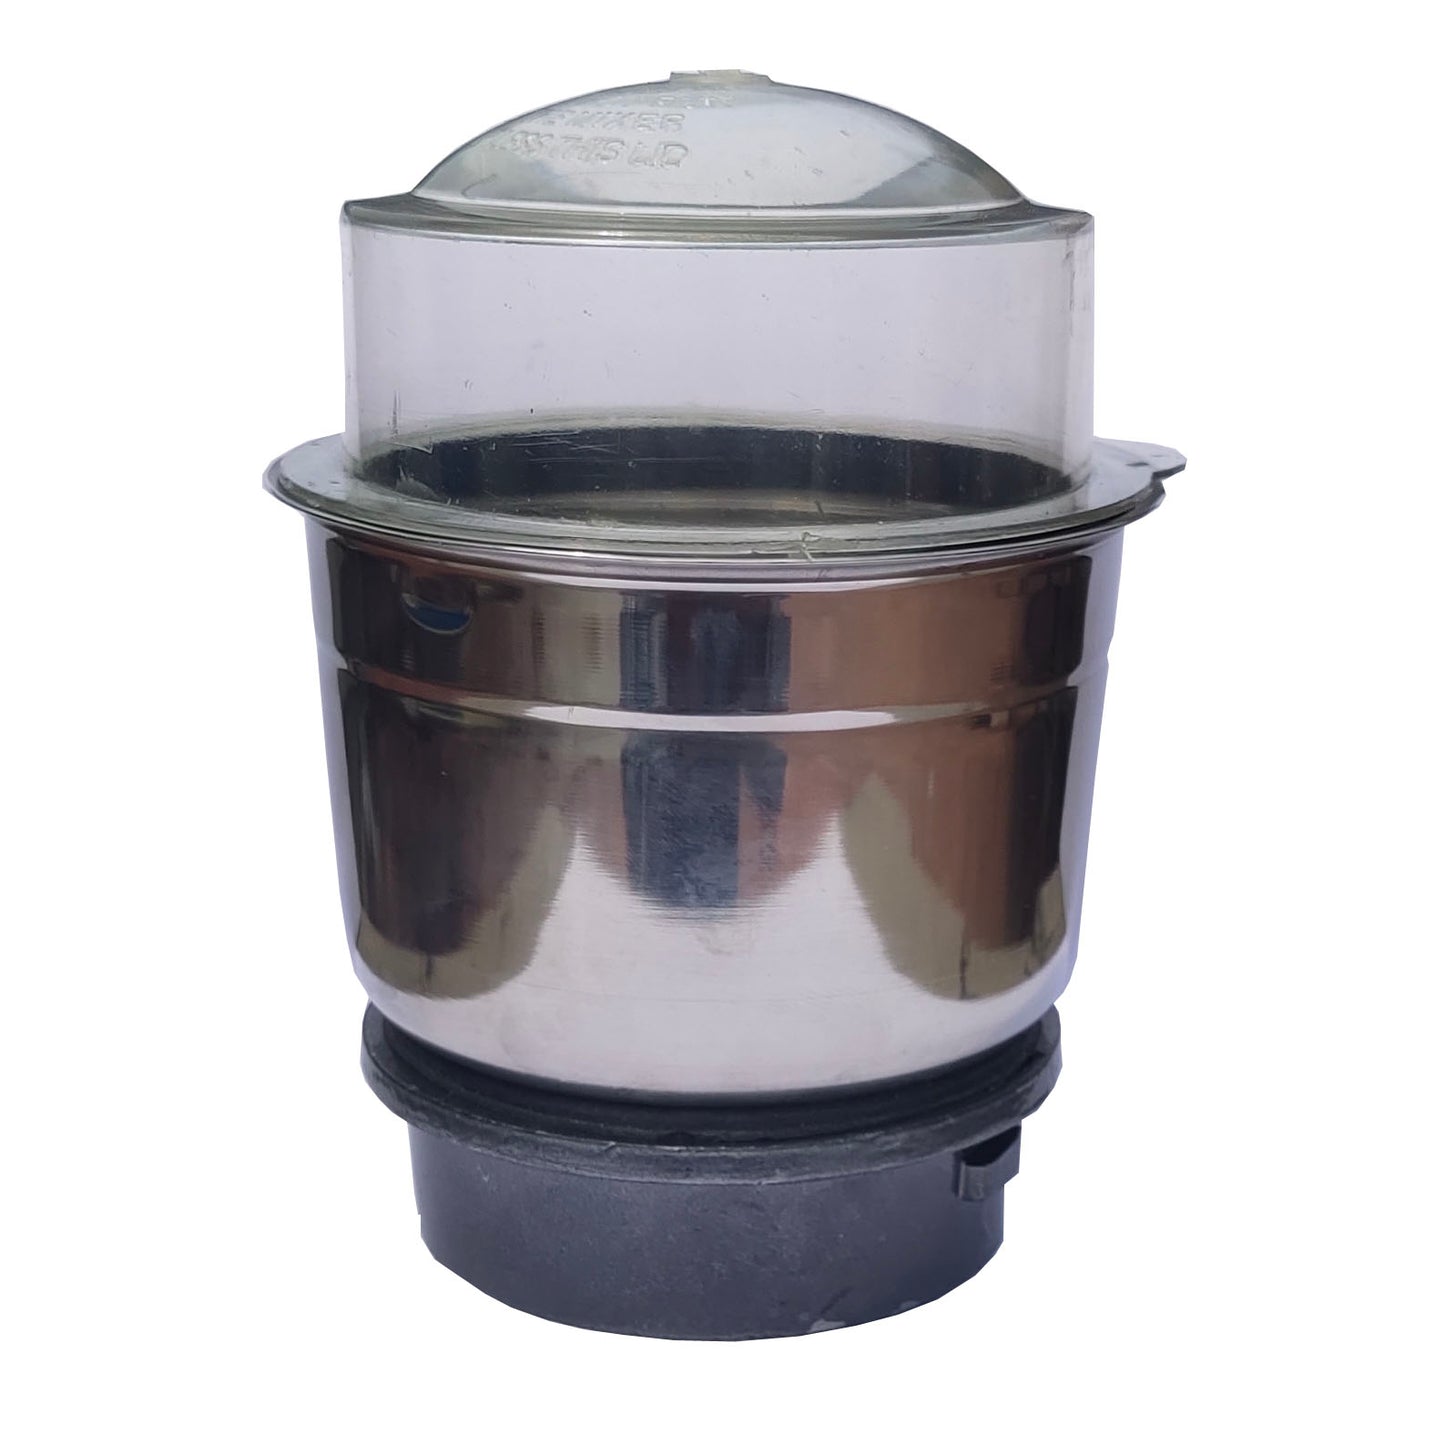 Mixie Jar/Chutney Attachment 300 ml suitable for all PHILIPS New Left Mixie